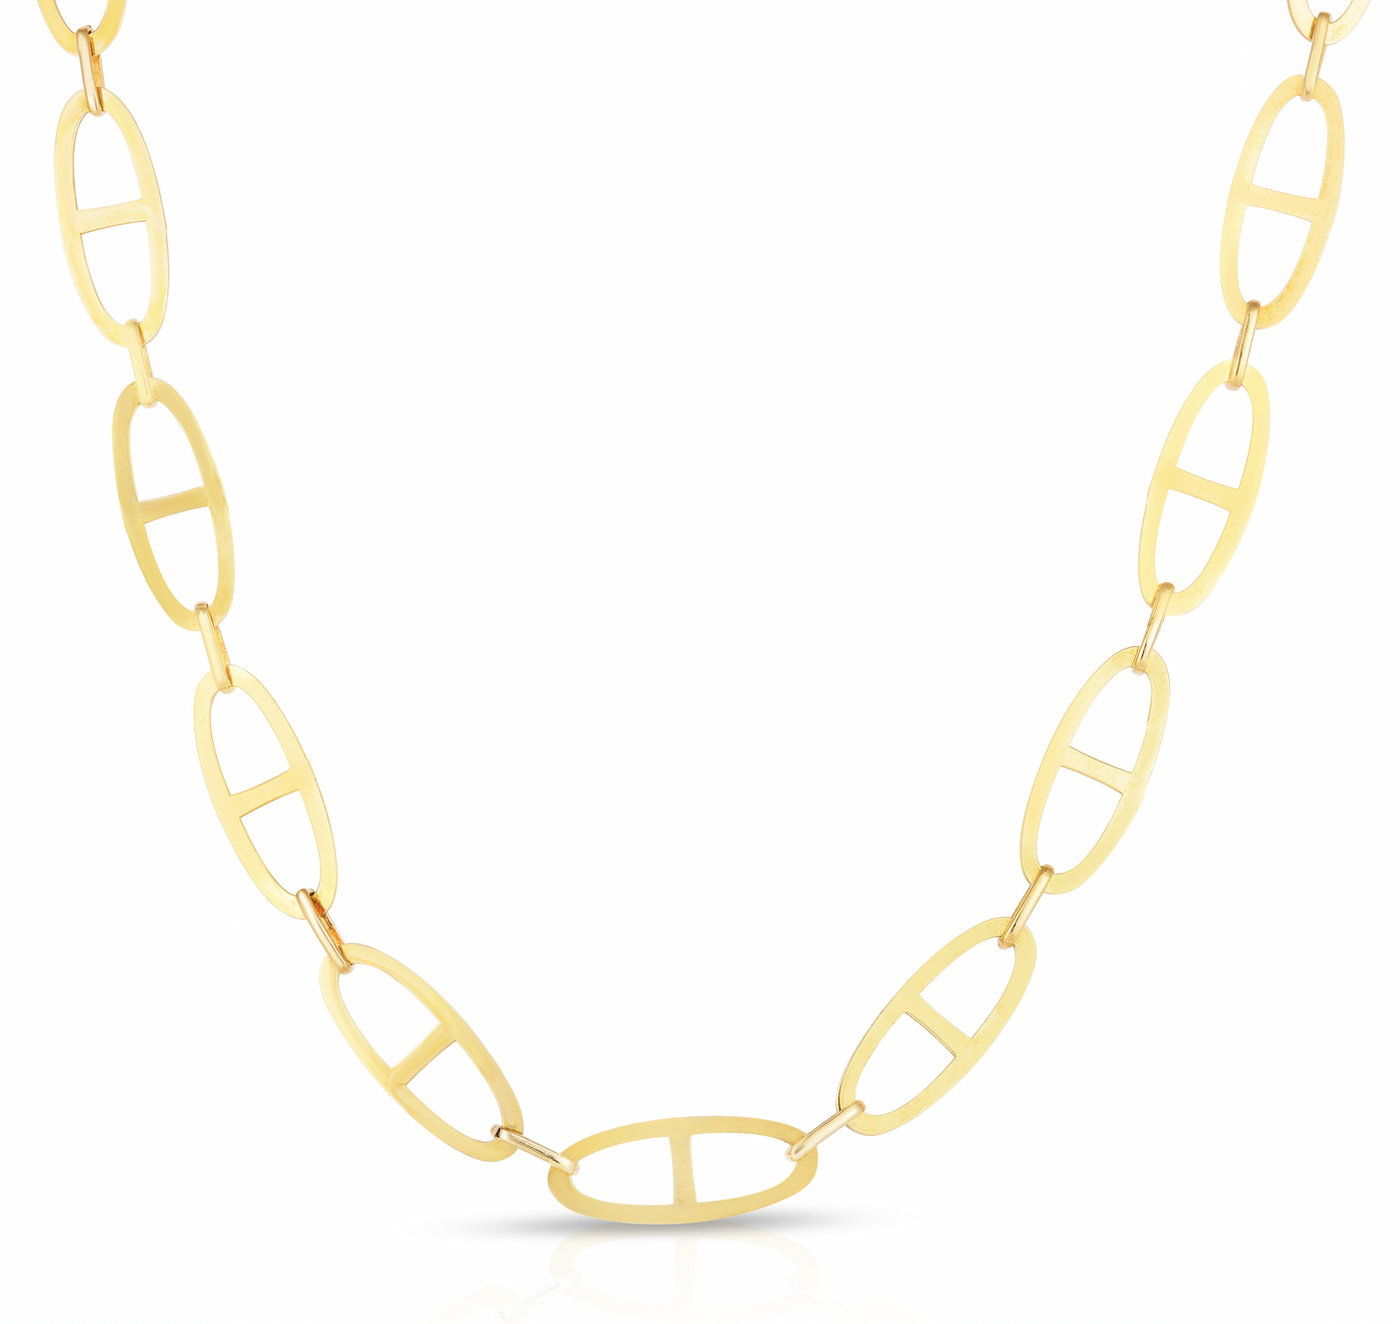 CHARLI- The Wide Mariner Necklace